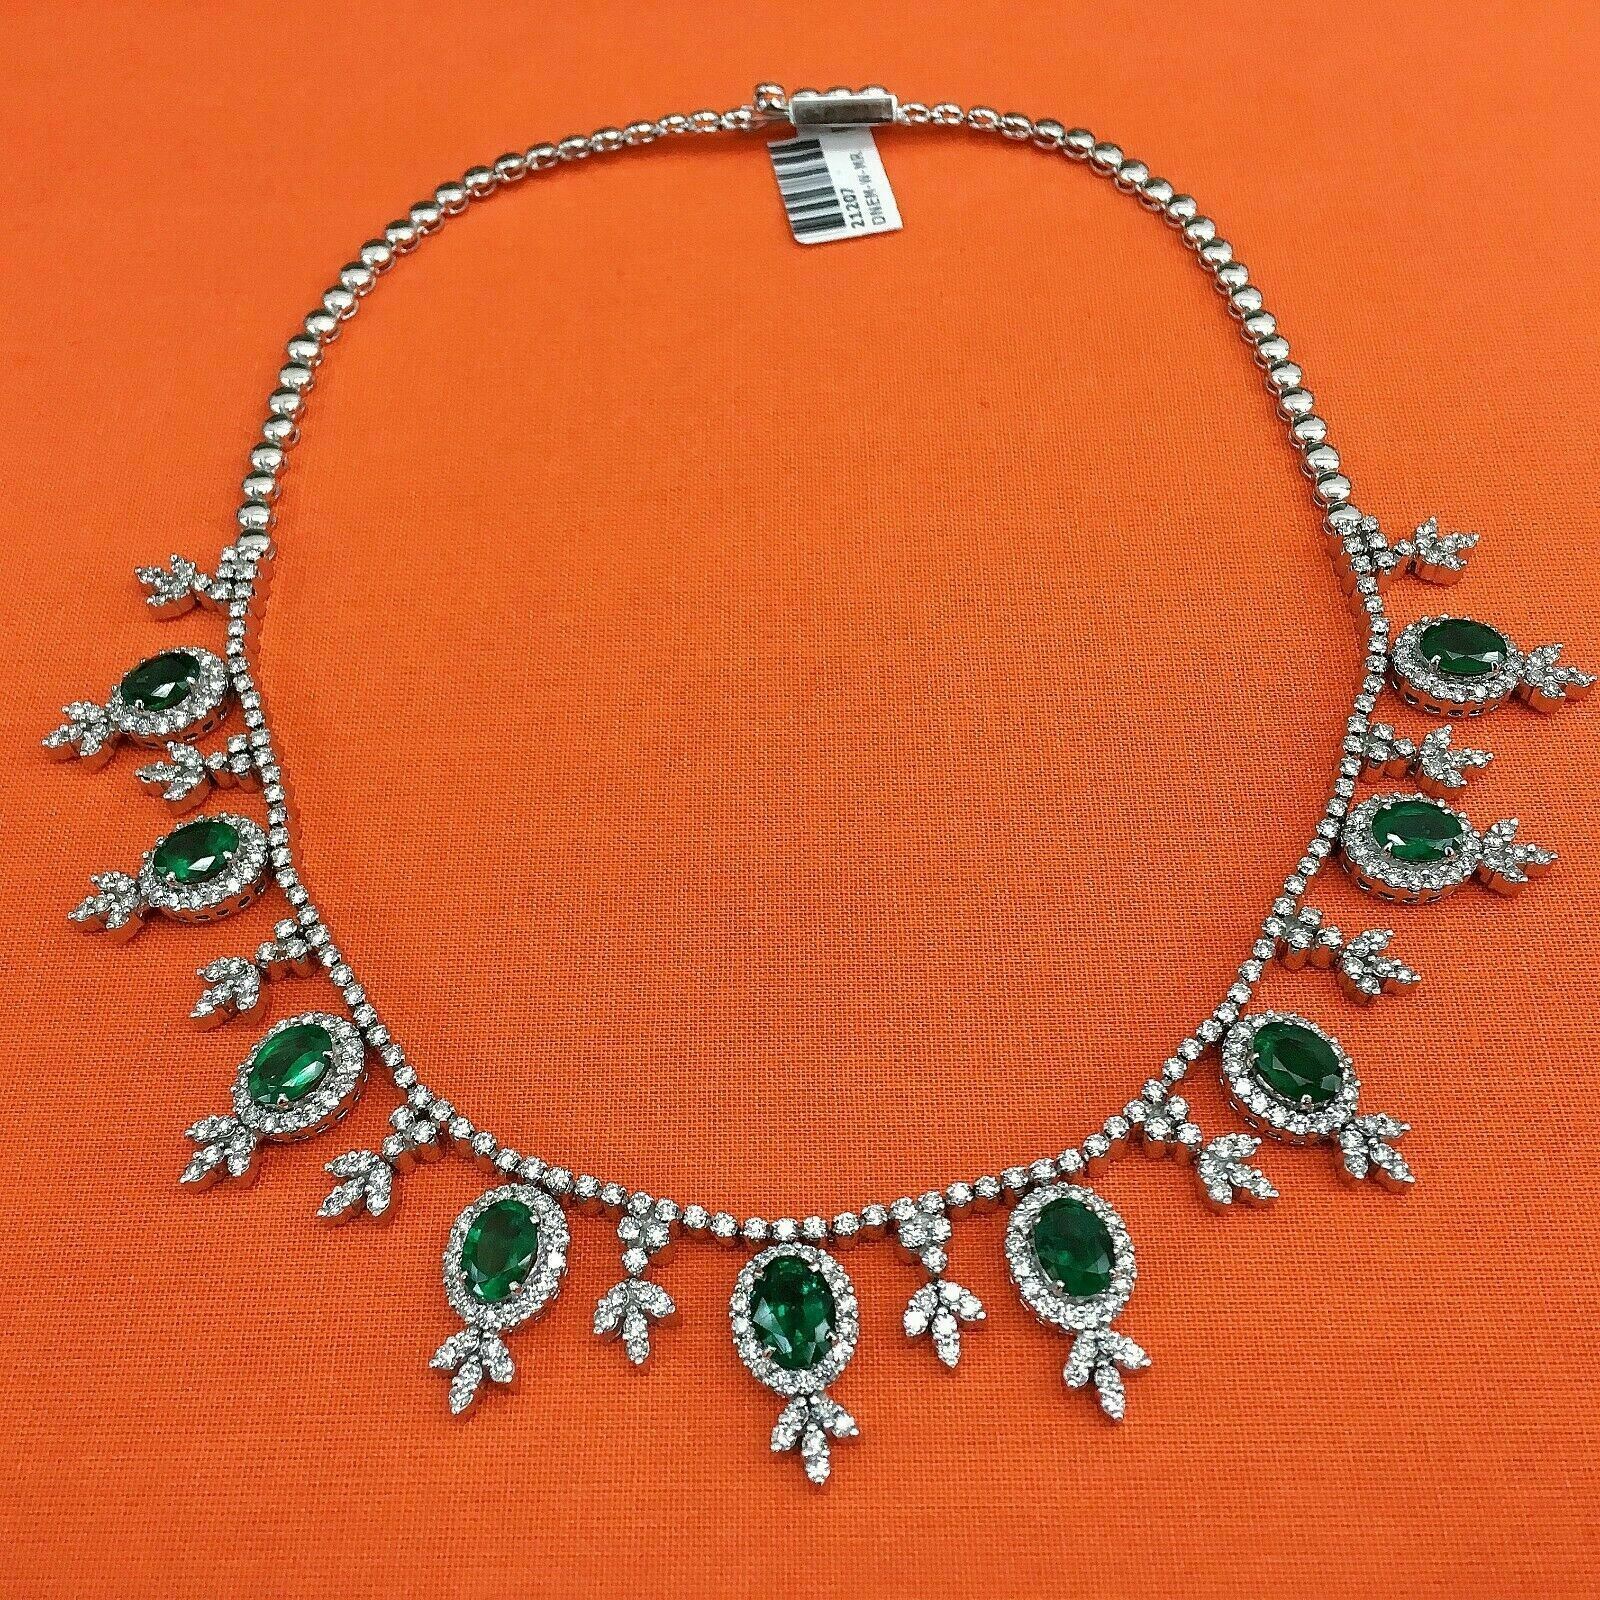 emerald and diamond necklace and earring set